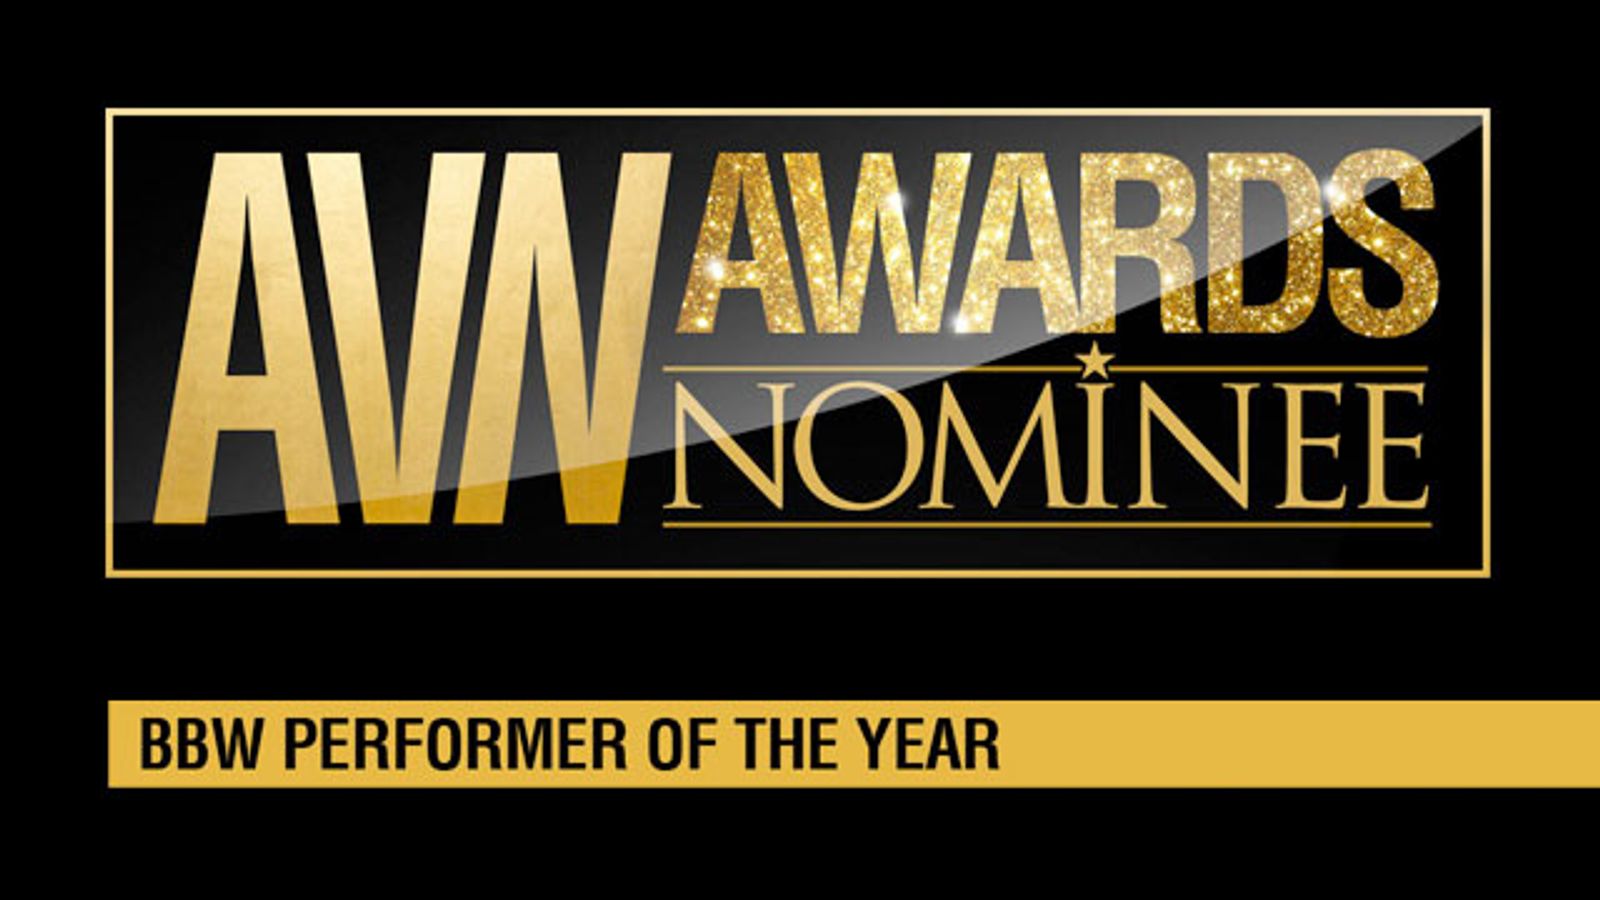 Meet the 2014 Nominees for BBW Performer of the Year